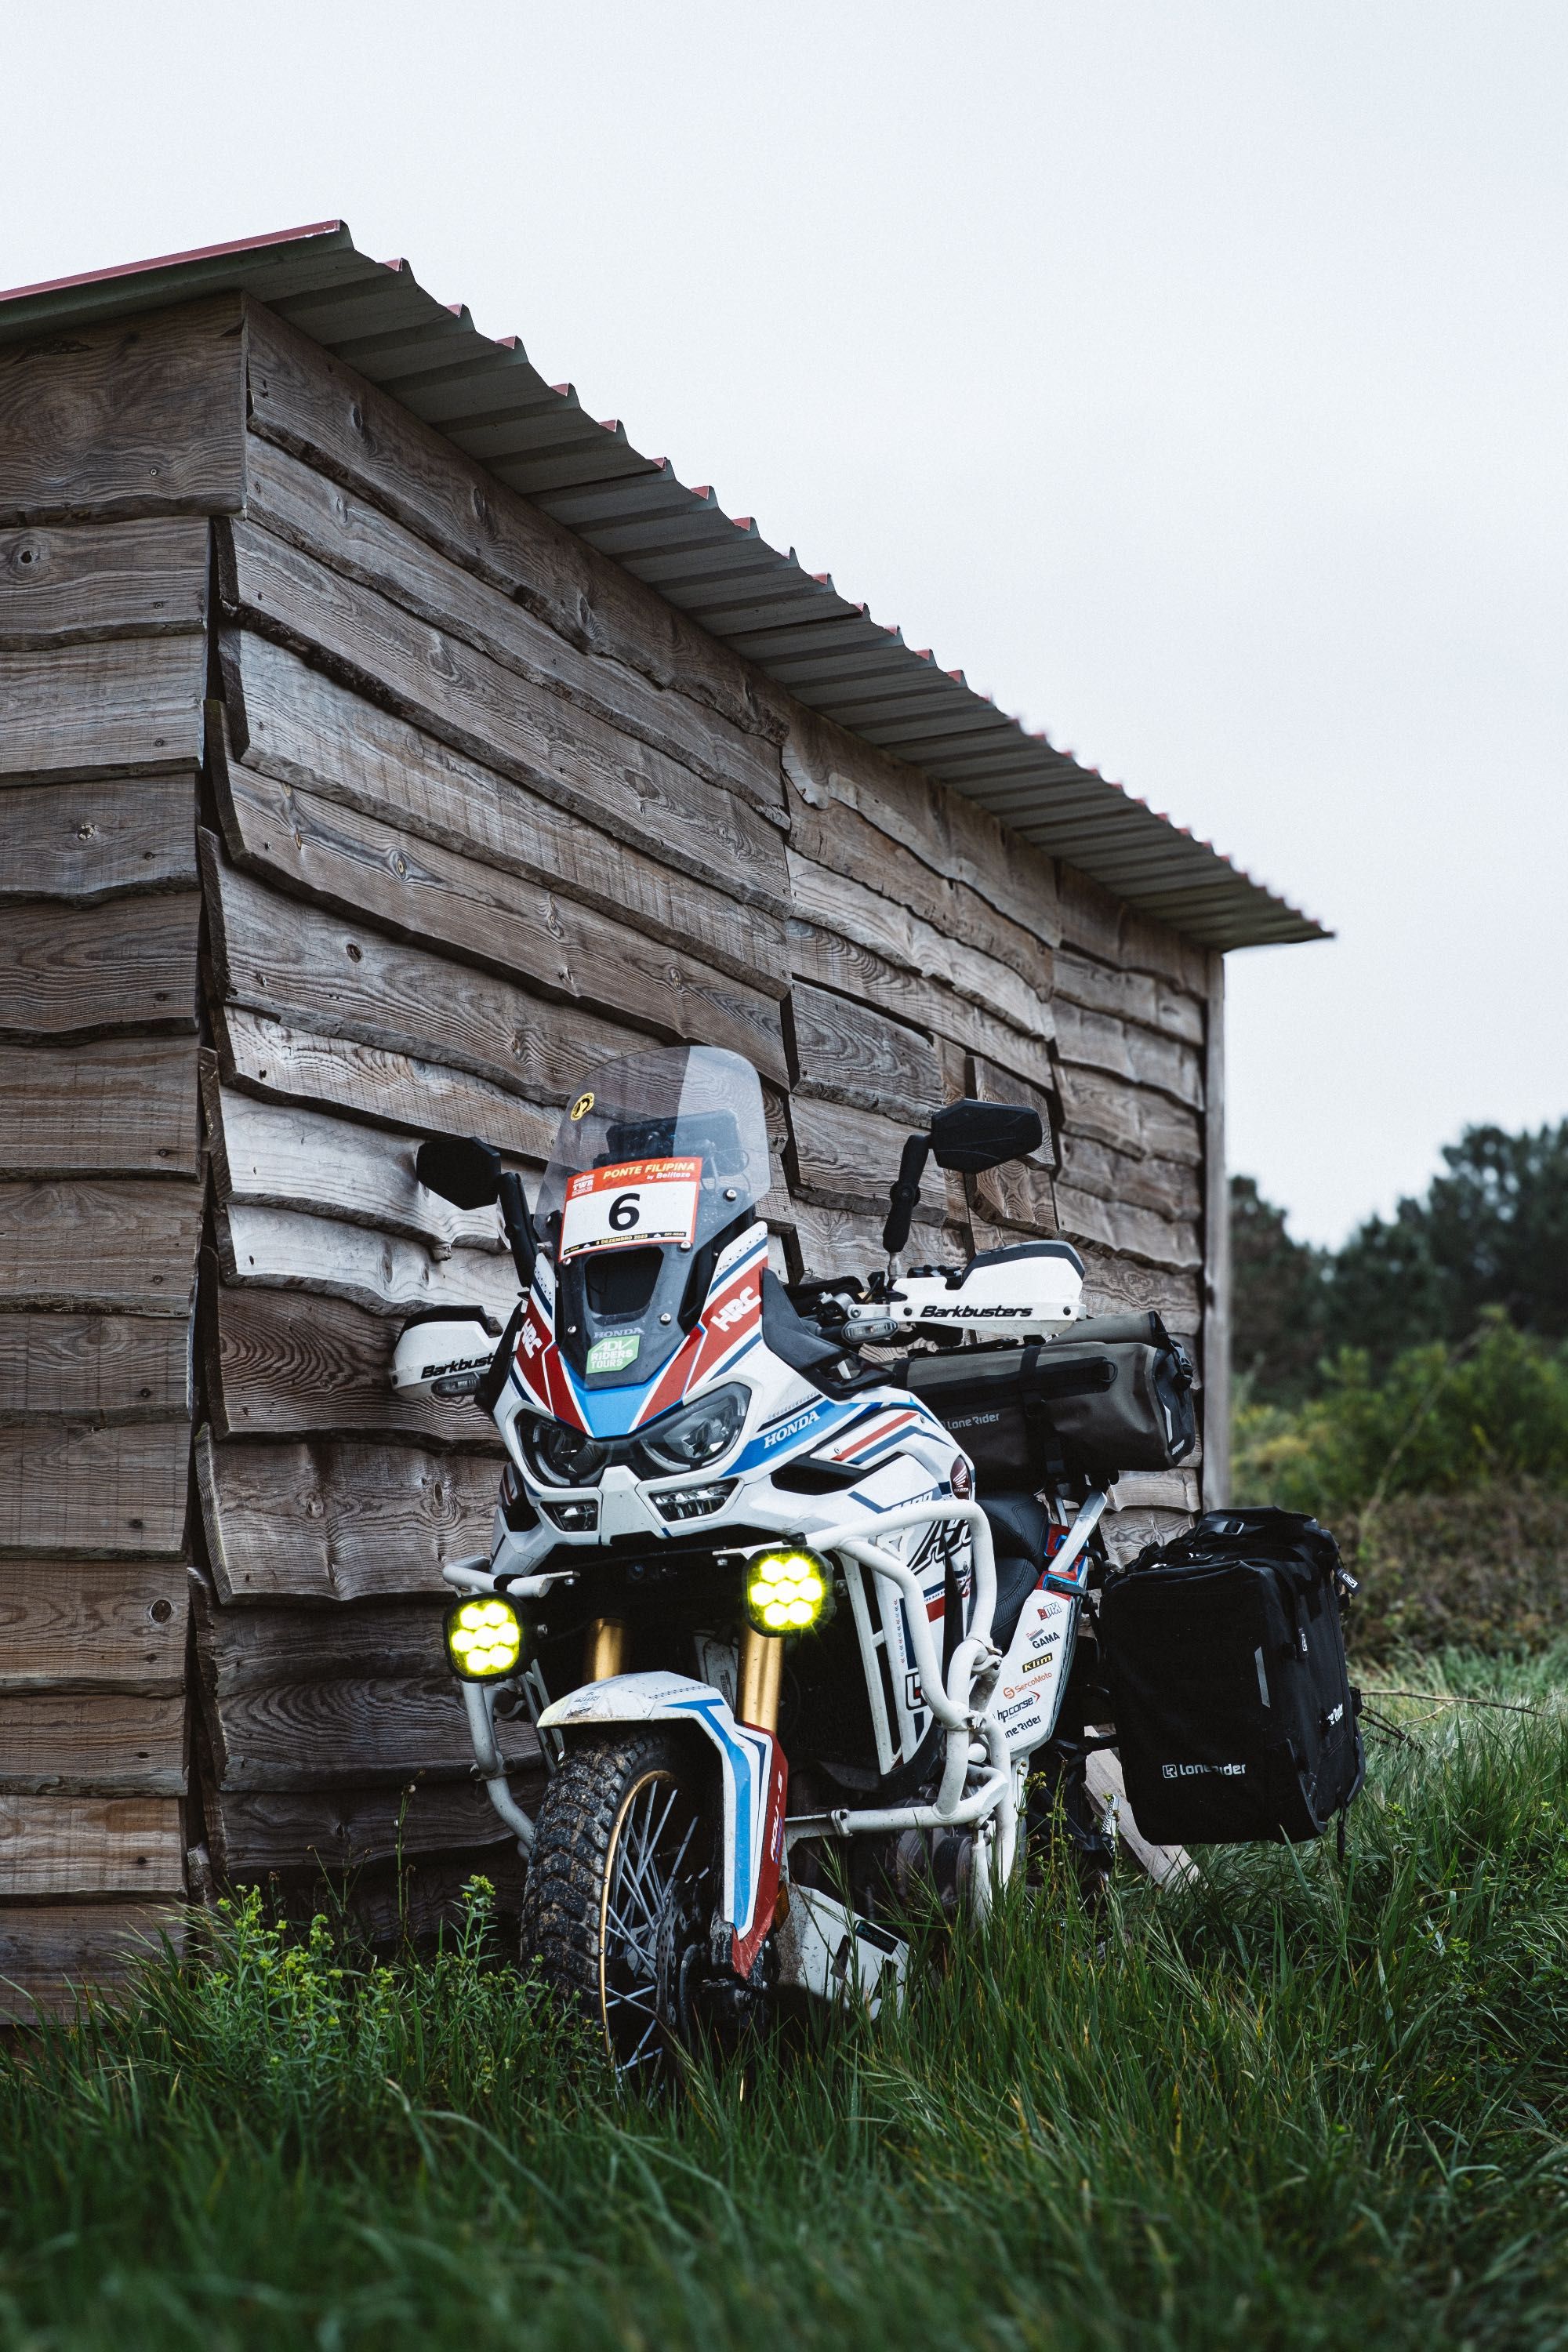 Barras Outback Motorteck - Africa twin 1100 ADV